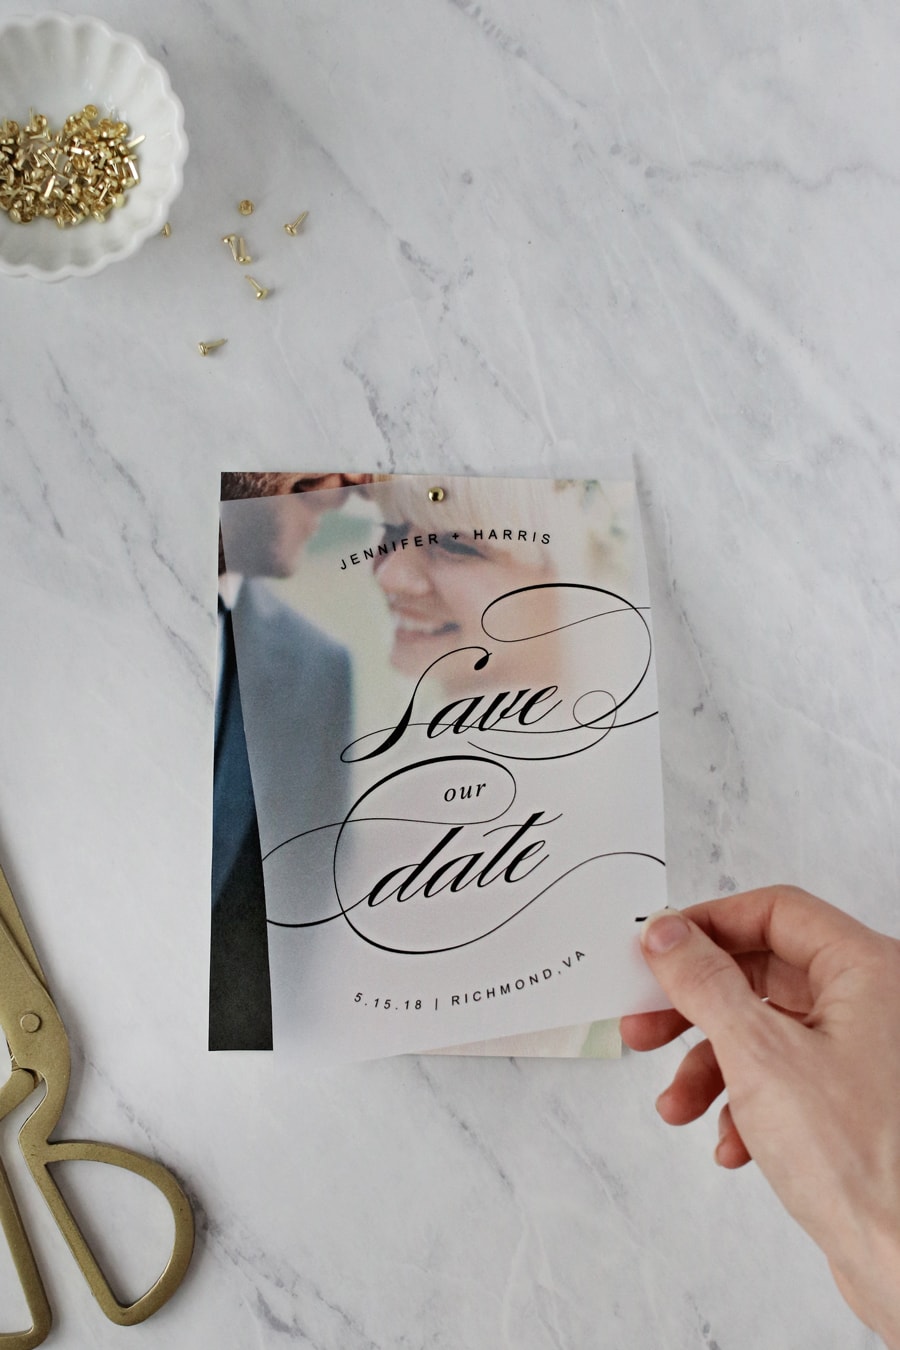 Use one of our free templates to make your own free save the dates at home. Not only are they quick and easy but your guests will love them.